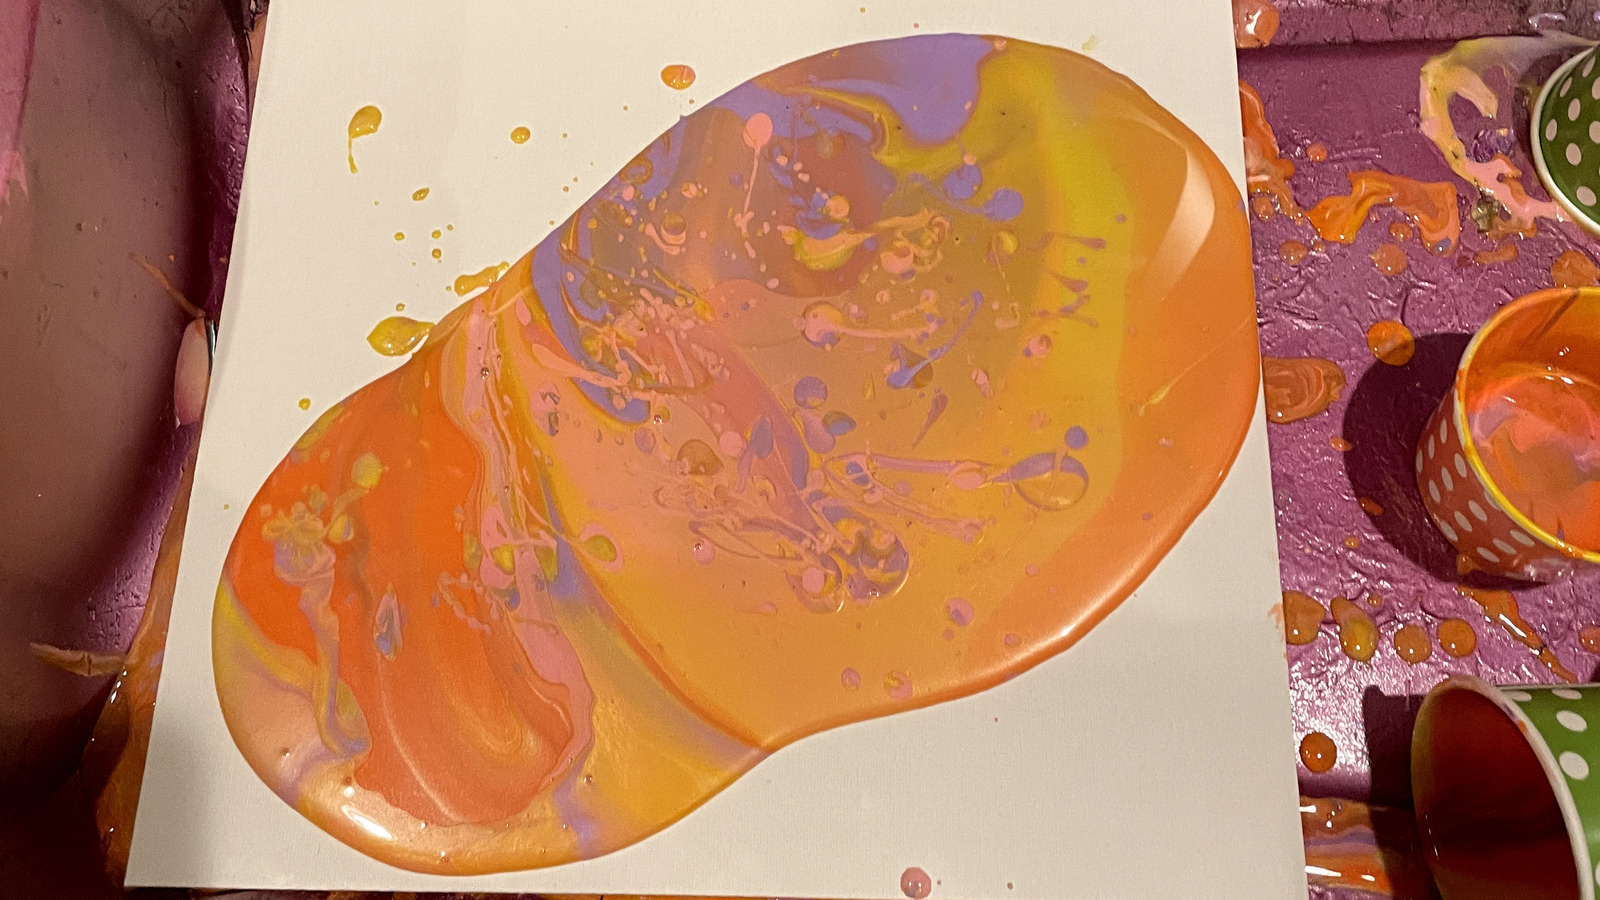 Try acrylic pour painting and go with the flow